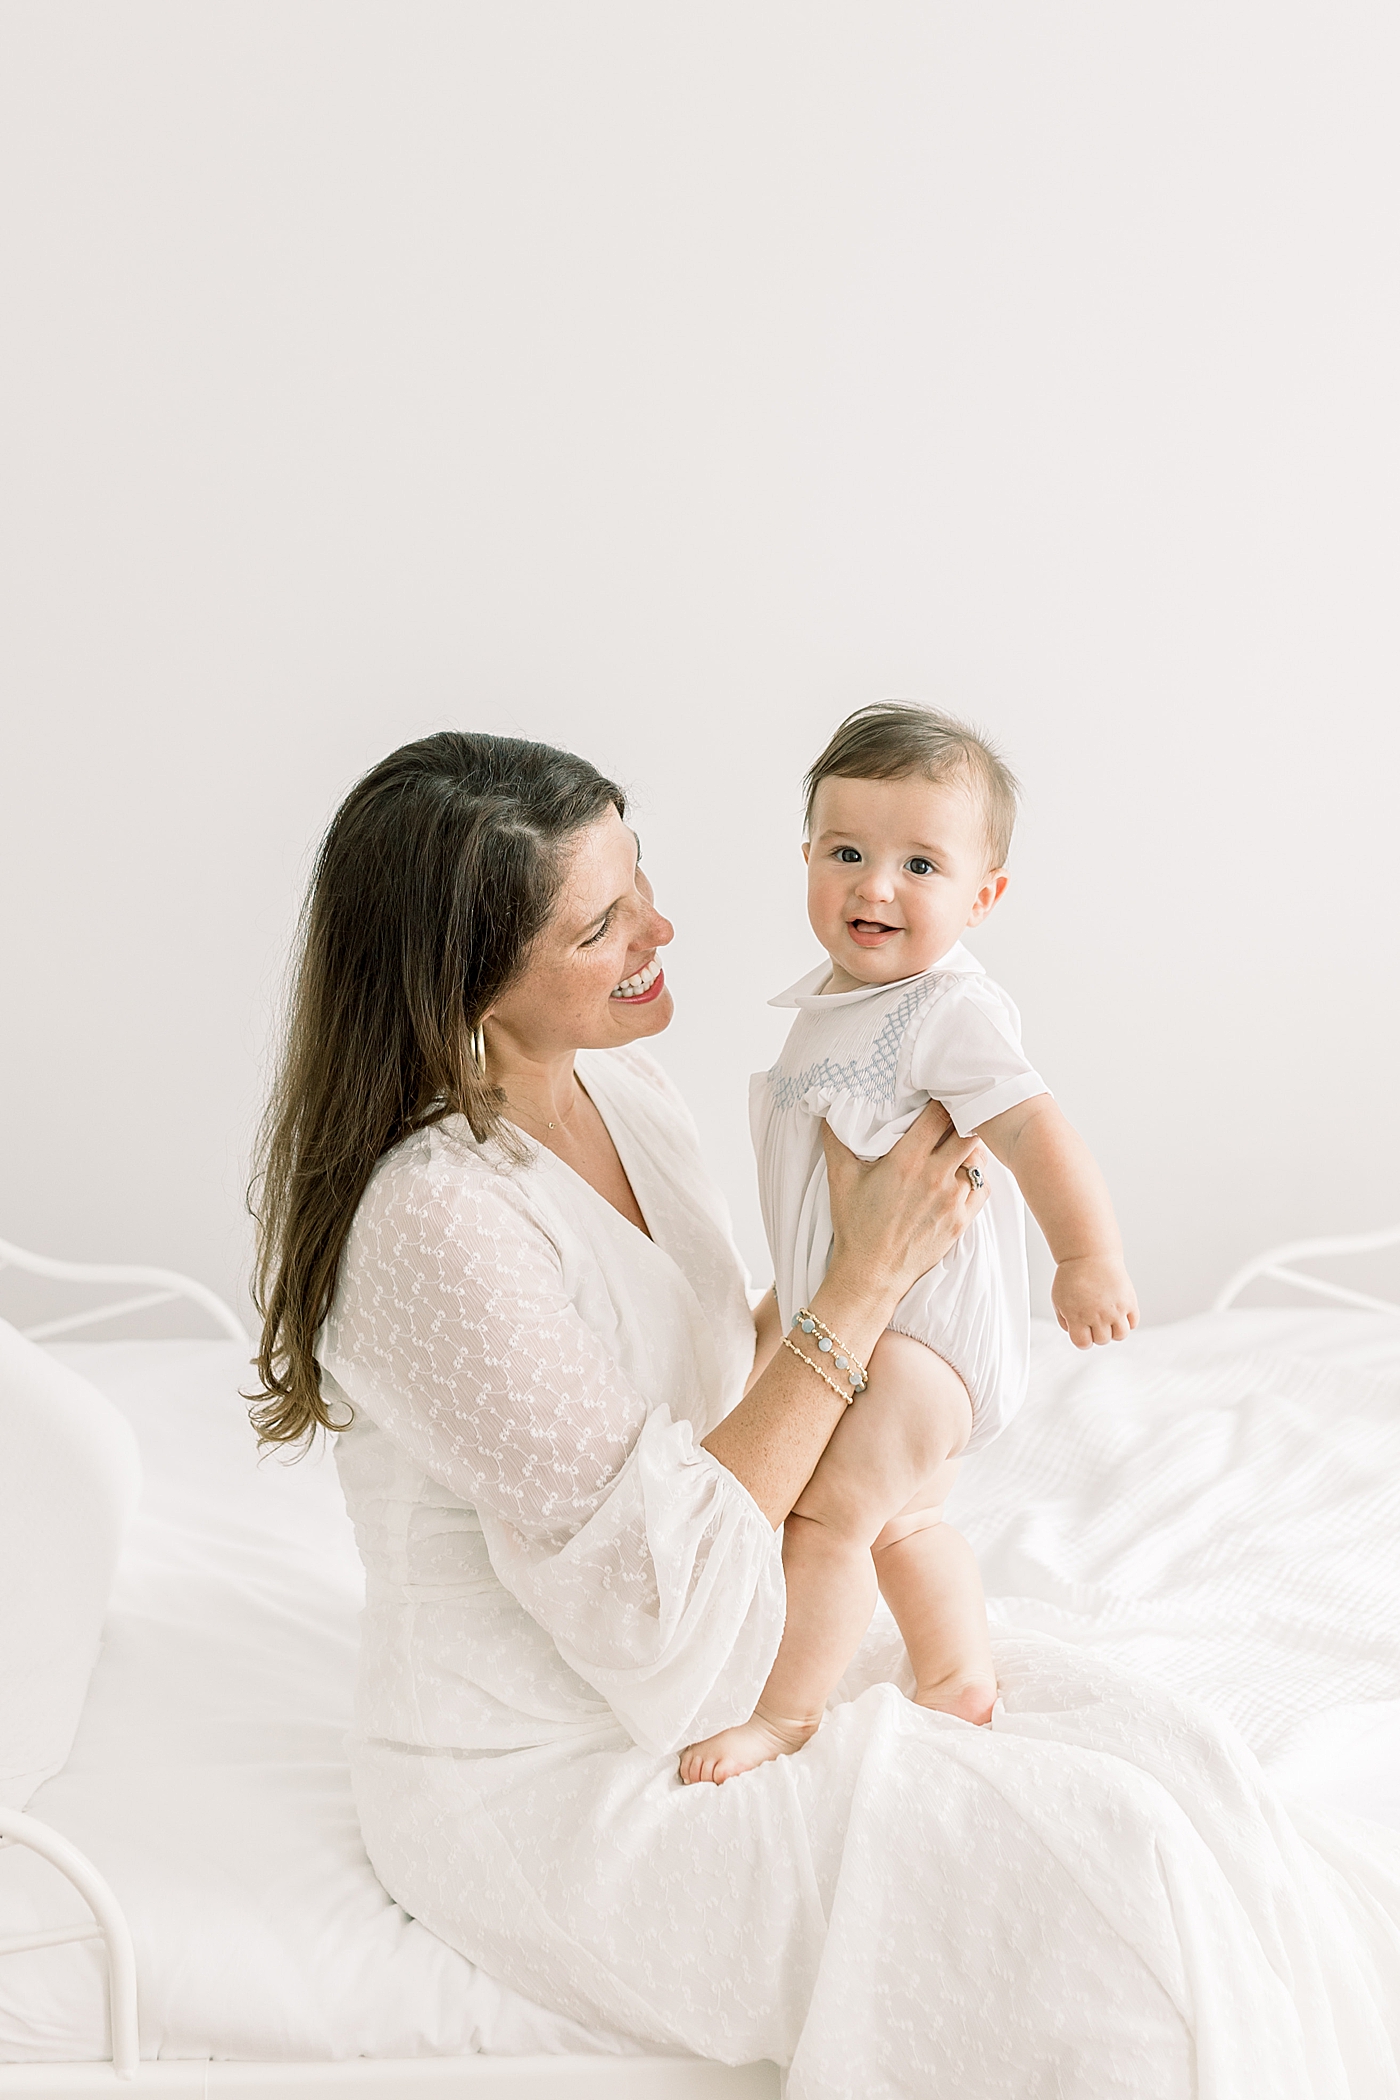 Mother looking at and holding her baby, while baby is looking at the camera in a softly lit room during Studio Milestone Session | Images by Caitlyn Motycka